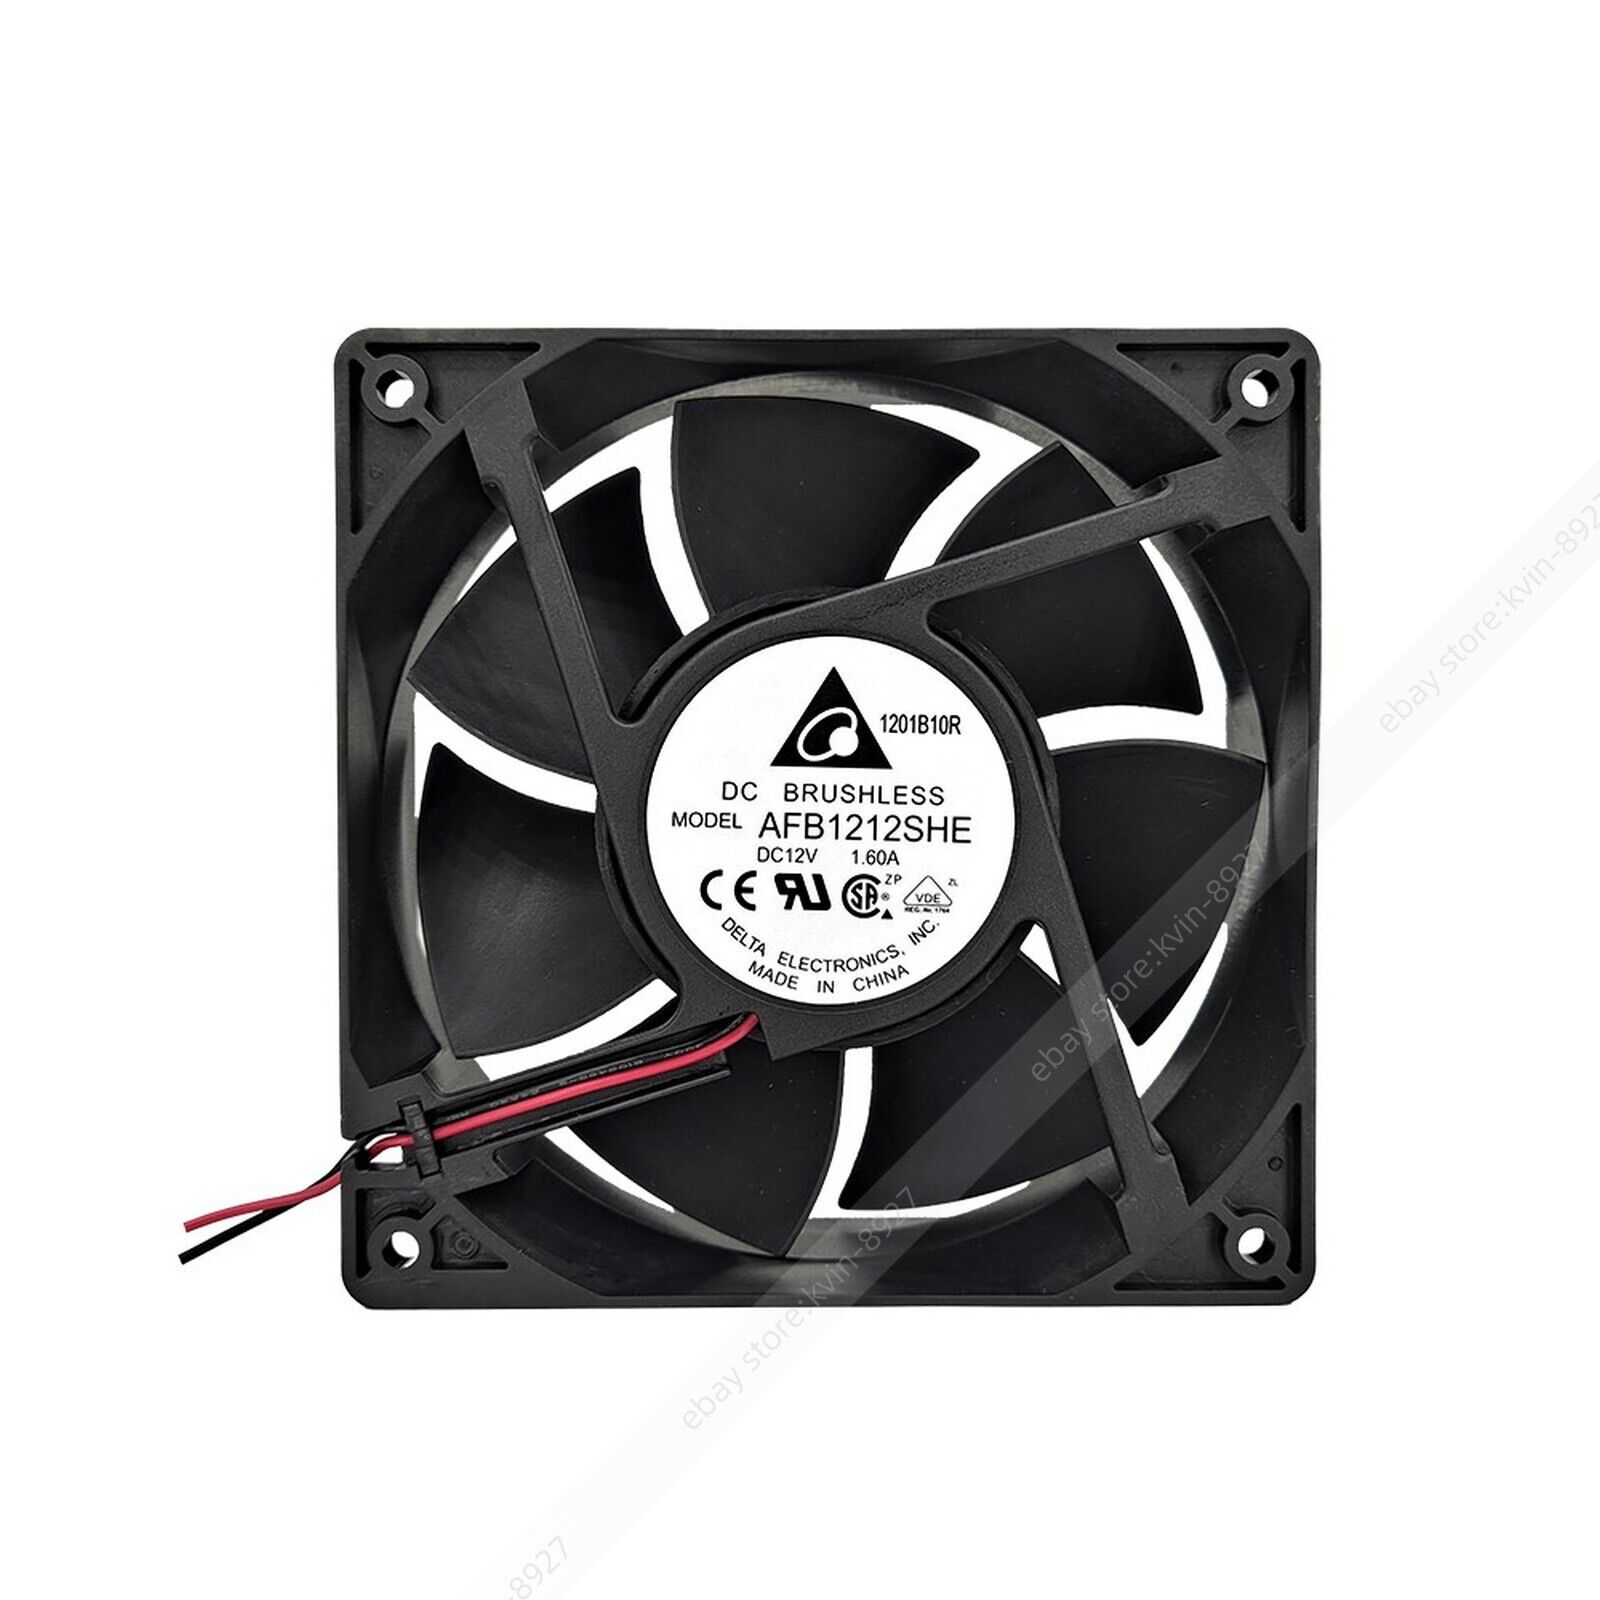 1PC DELTA AFB1212SHE DC12V 1.6A 12038 120cm 2-Pin Server Cooling Fan